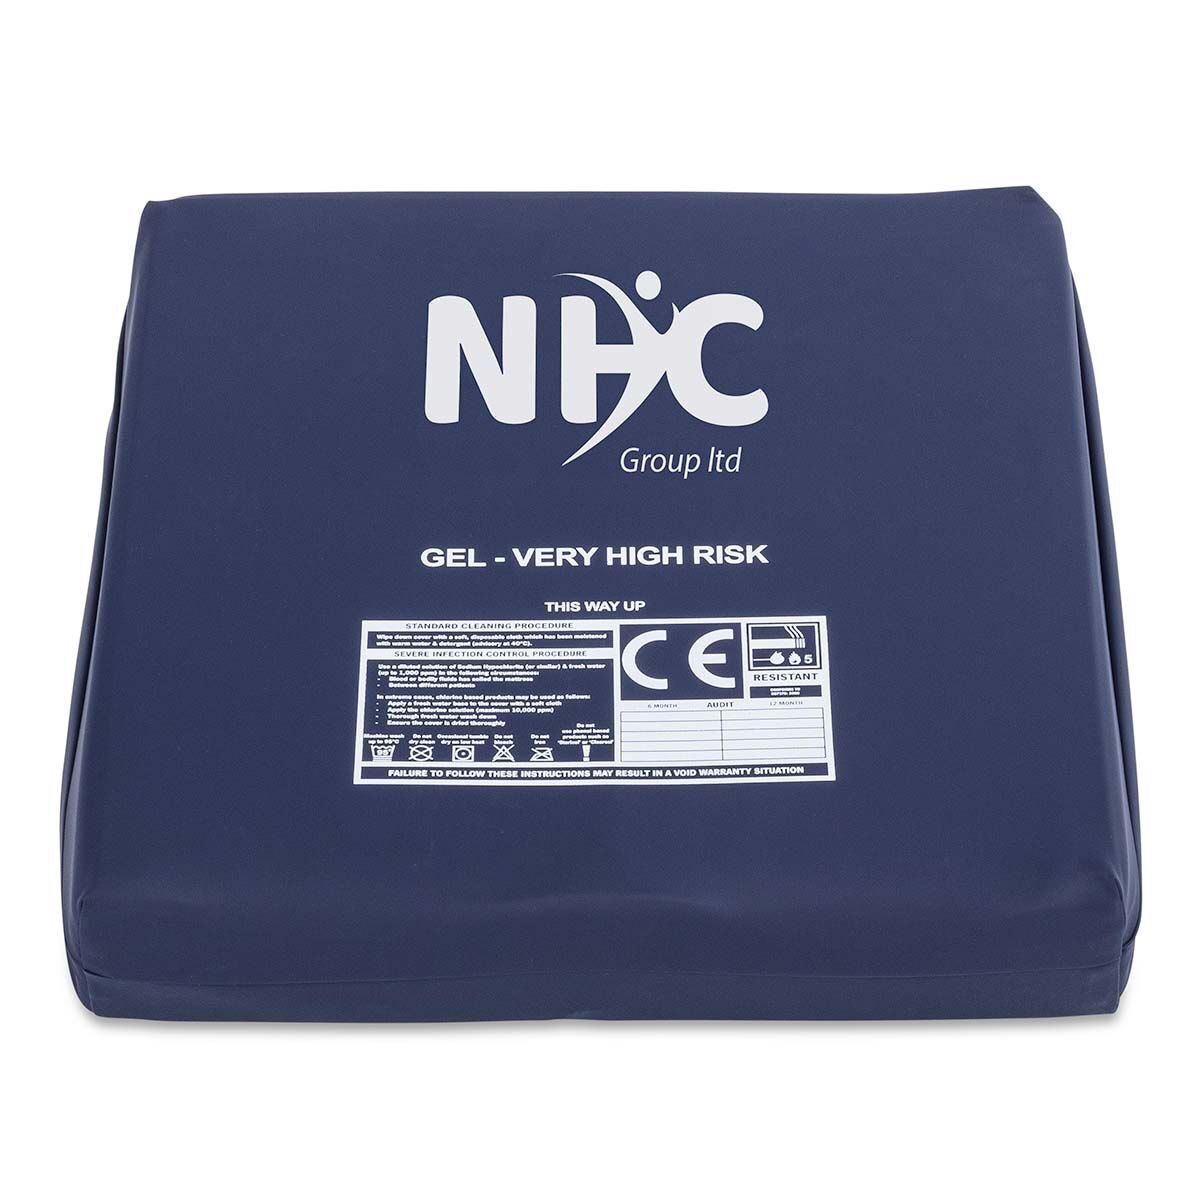 https://www.nhcgroup.co.uk/uploads/images/products/verylarge/northern-healthcare-gel-very-high-risk-cushion-1669723715Northern-Healthcare-Gel-Very-High-Risk-Cushion.jpg